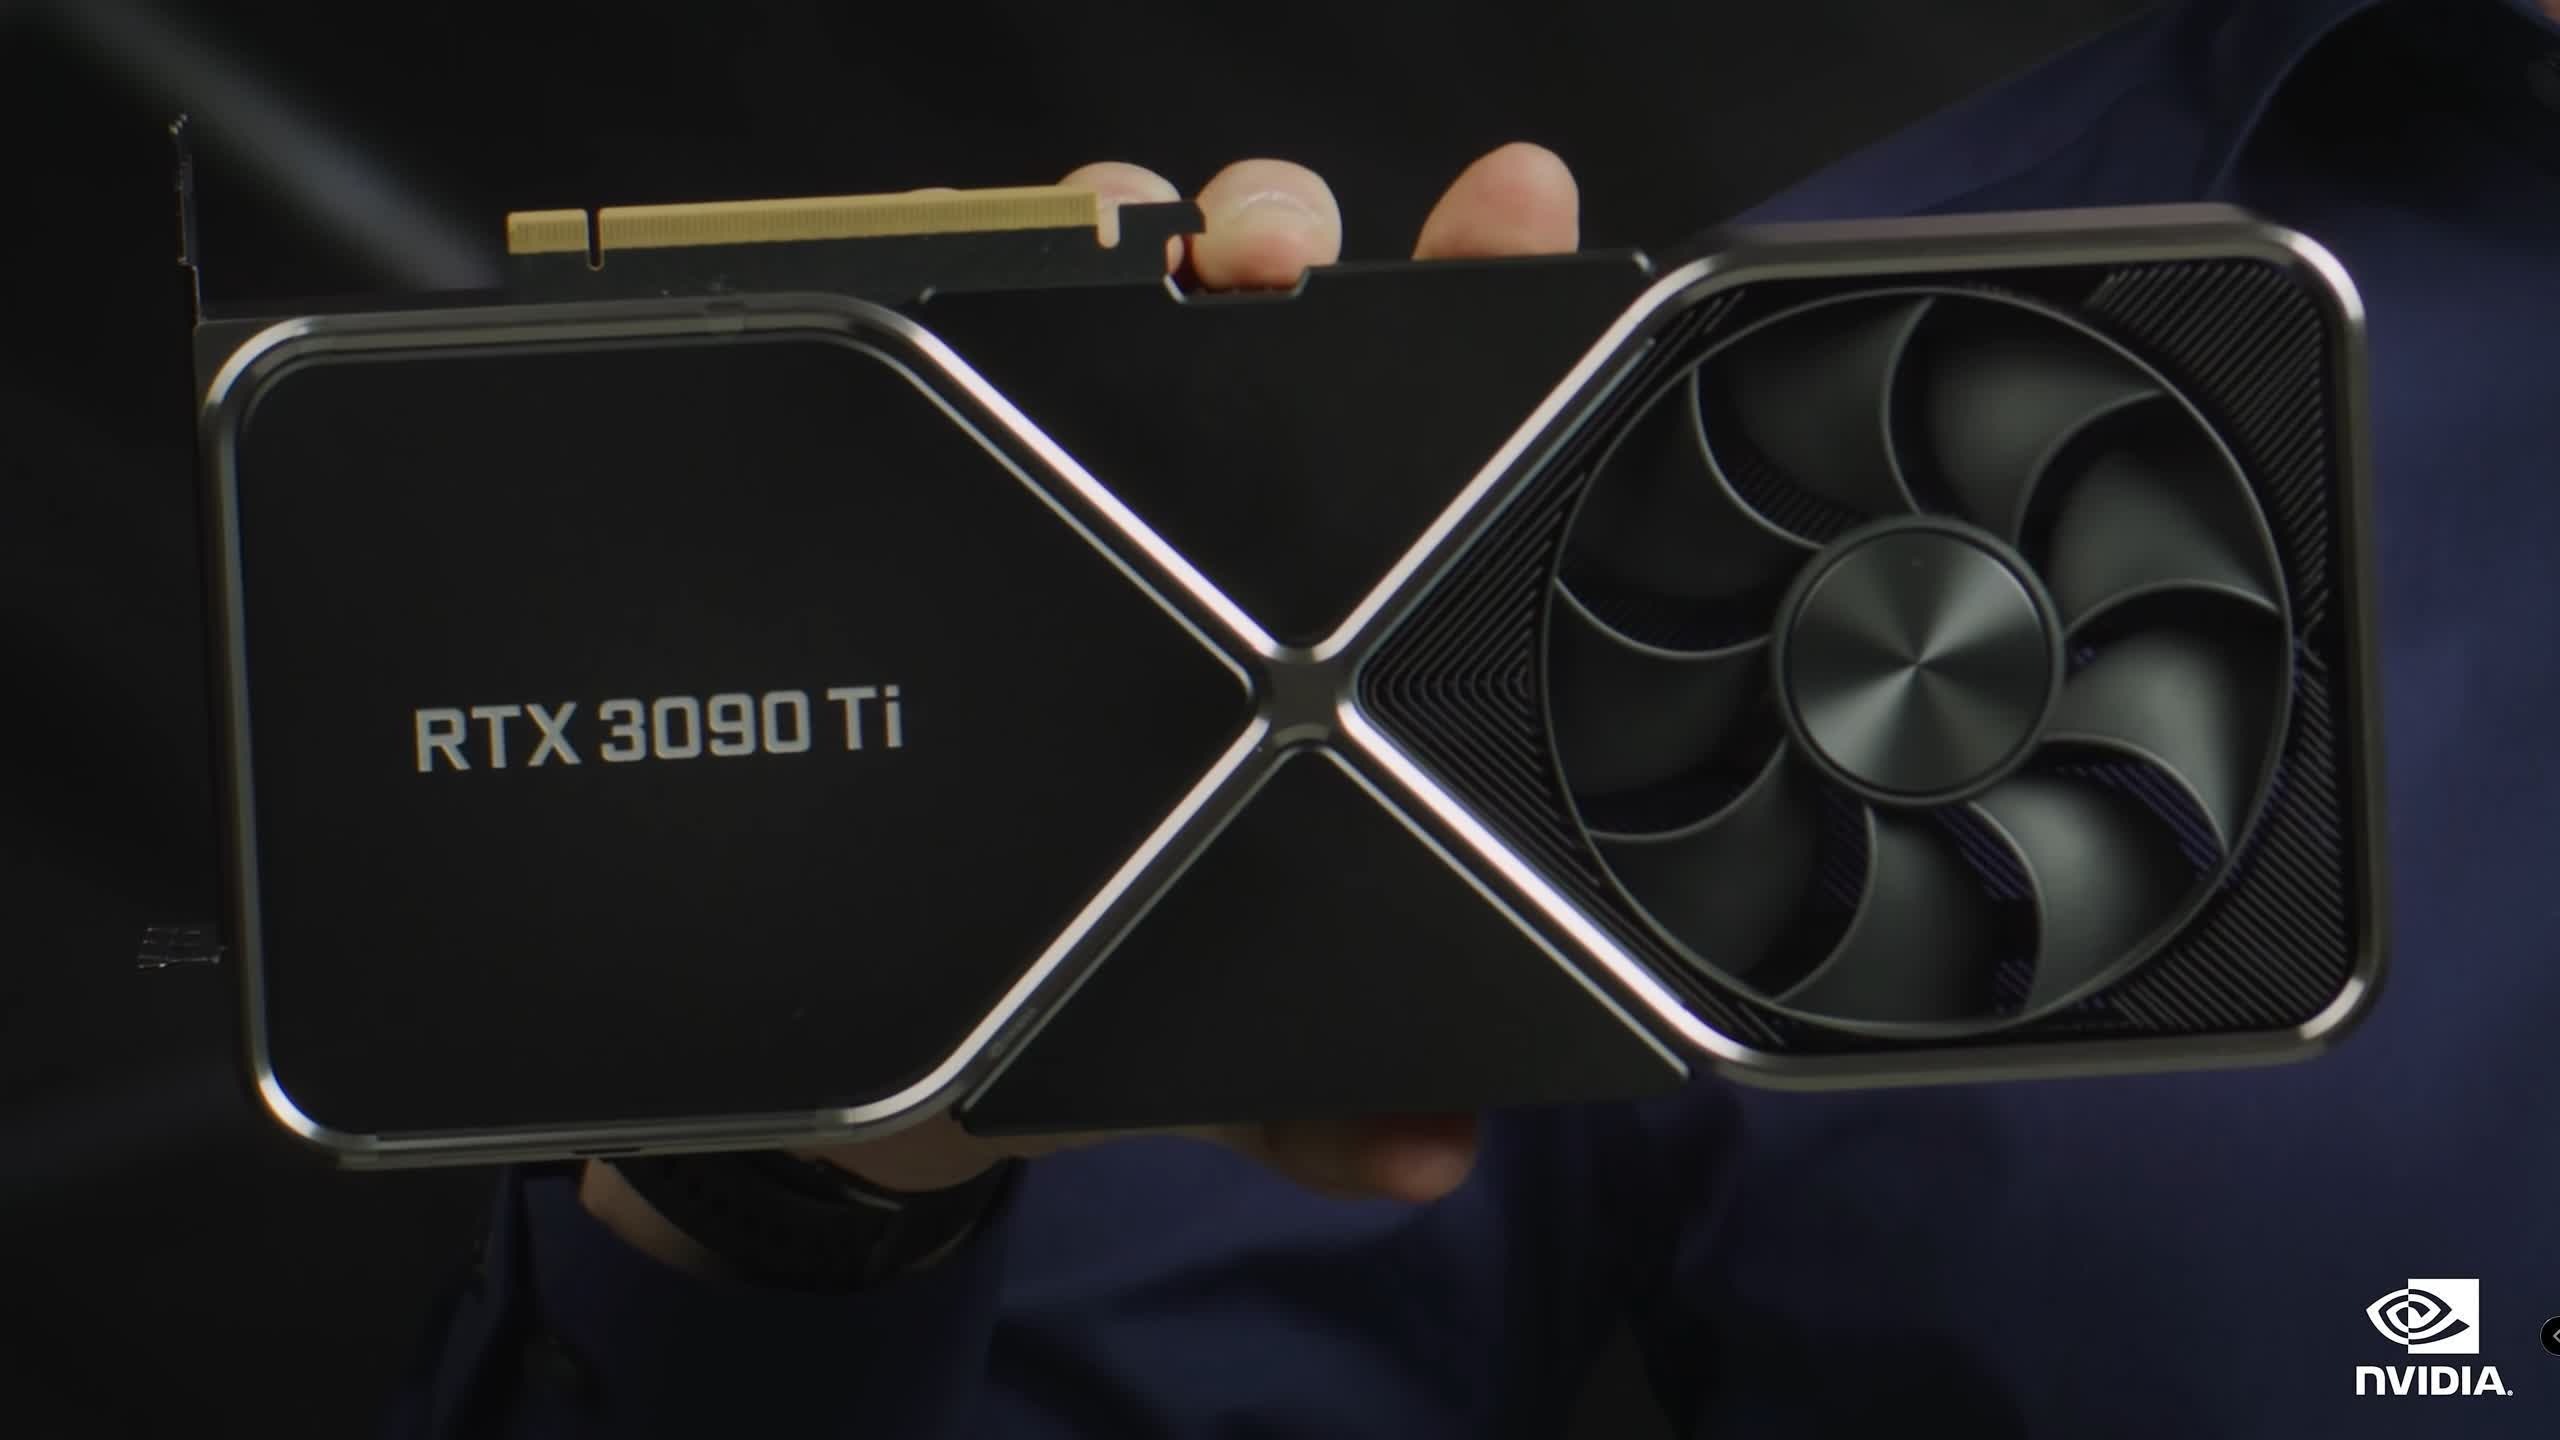 Custom RTX 3090 Ti cards priced over $4,000 appear on European site